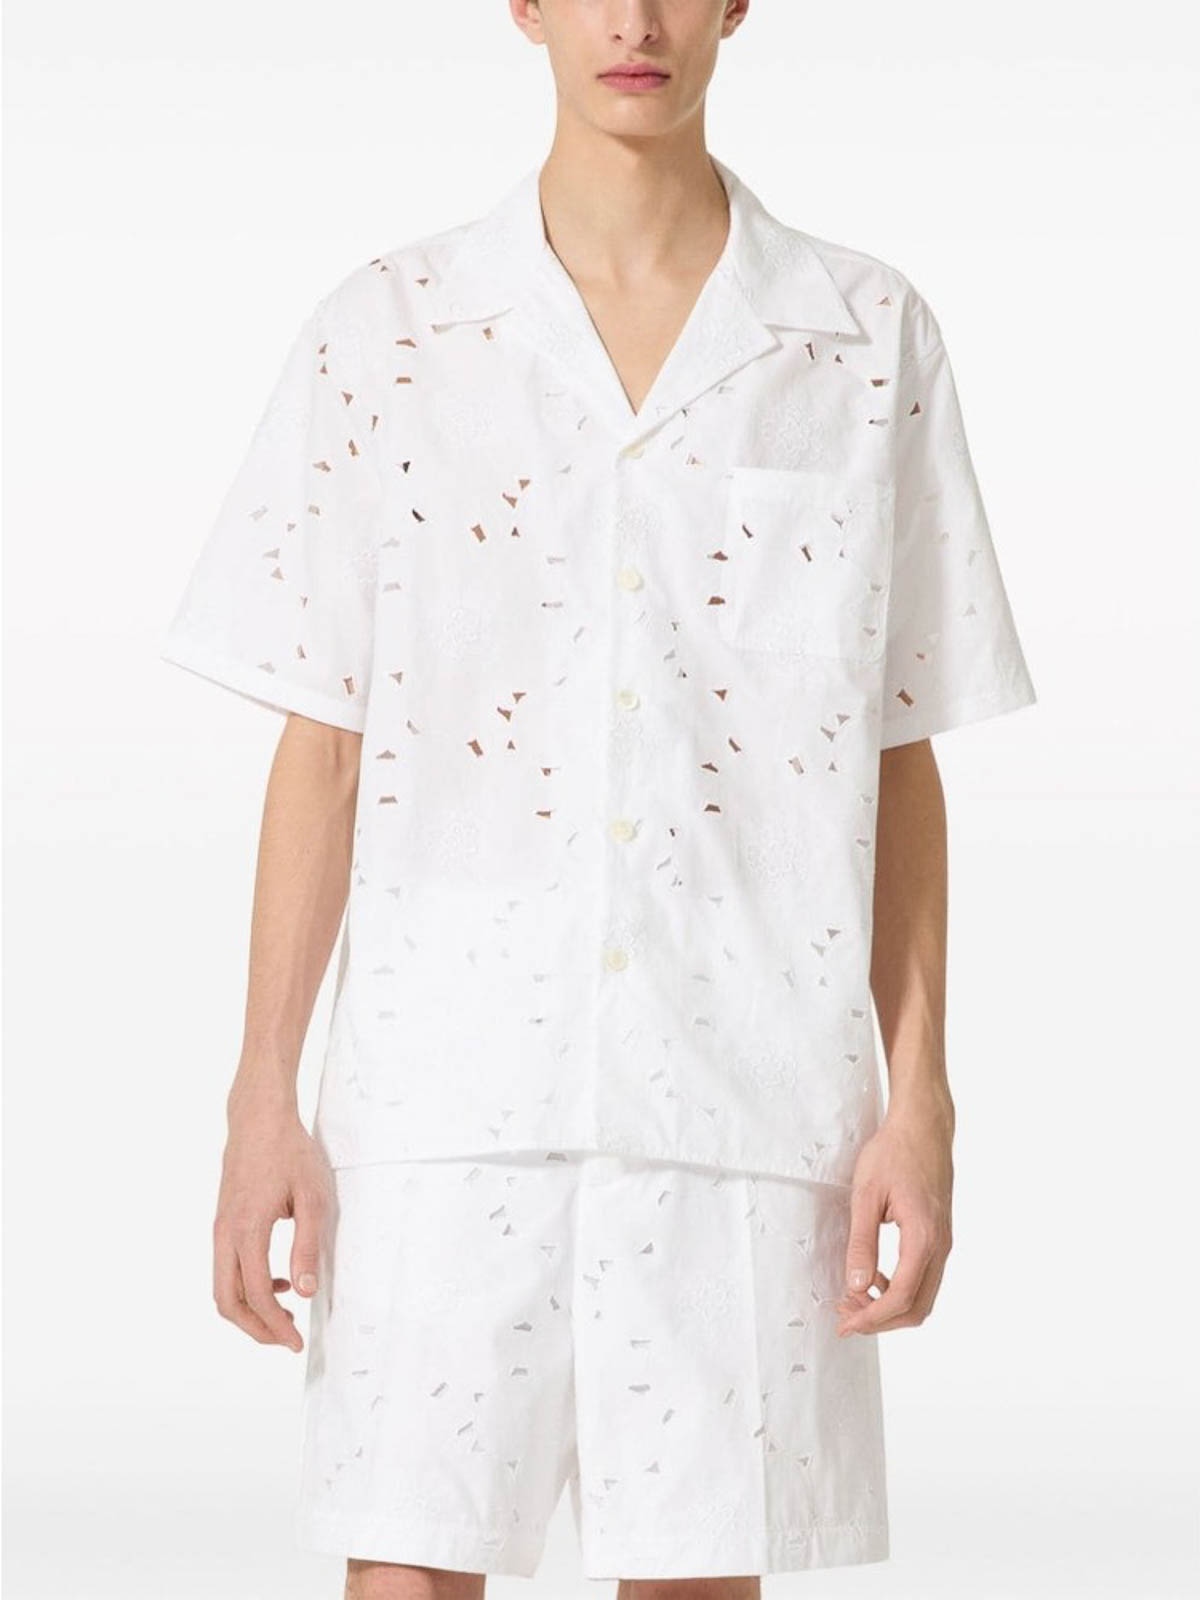 Shop Valentino White Broderie Anglaise Camp Collar Shirt